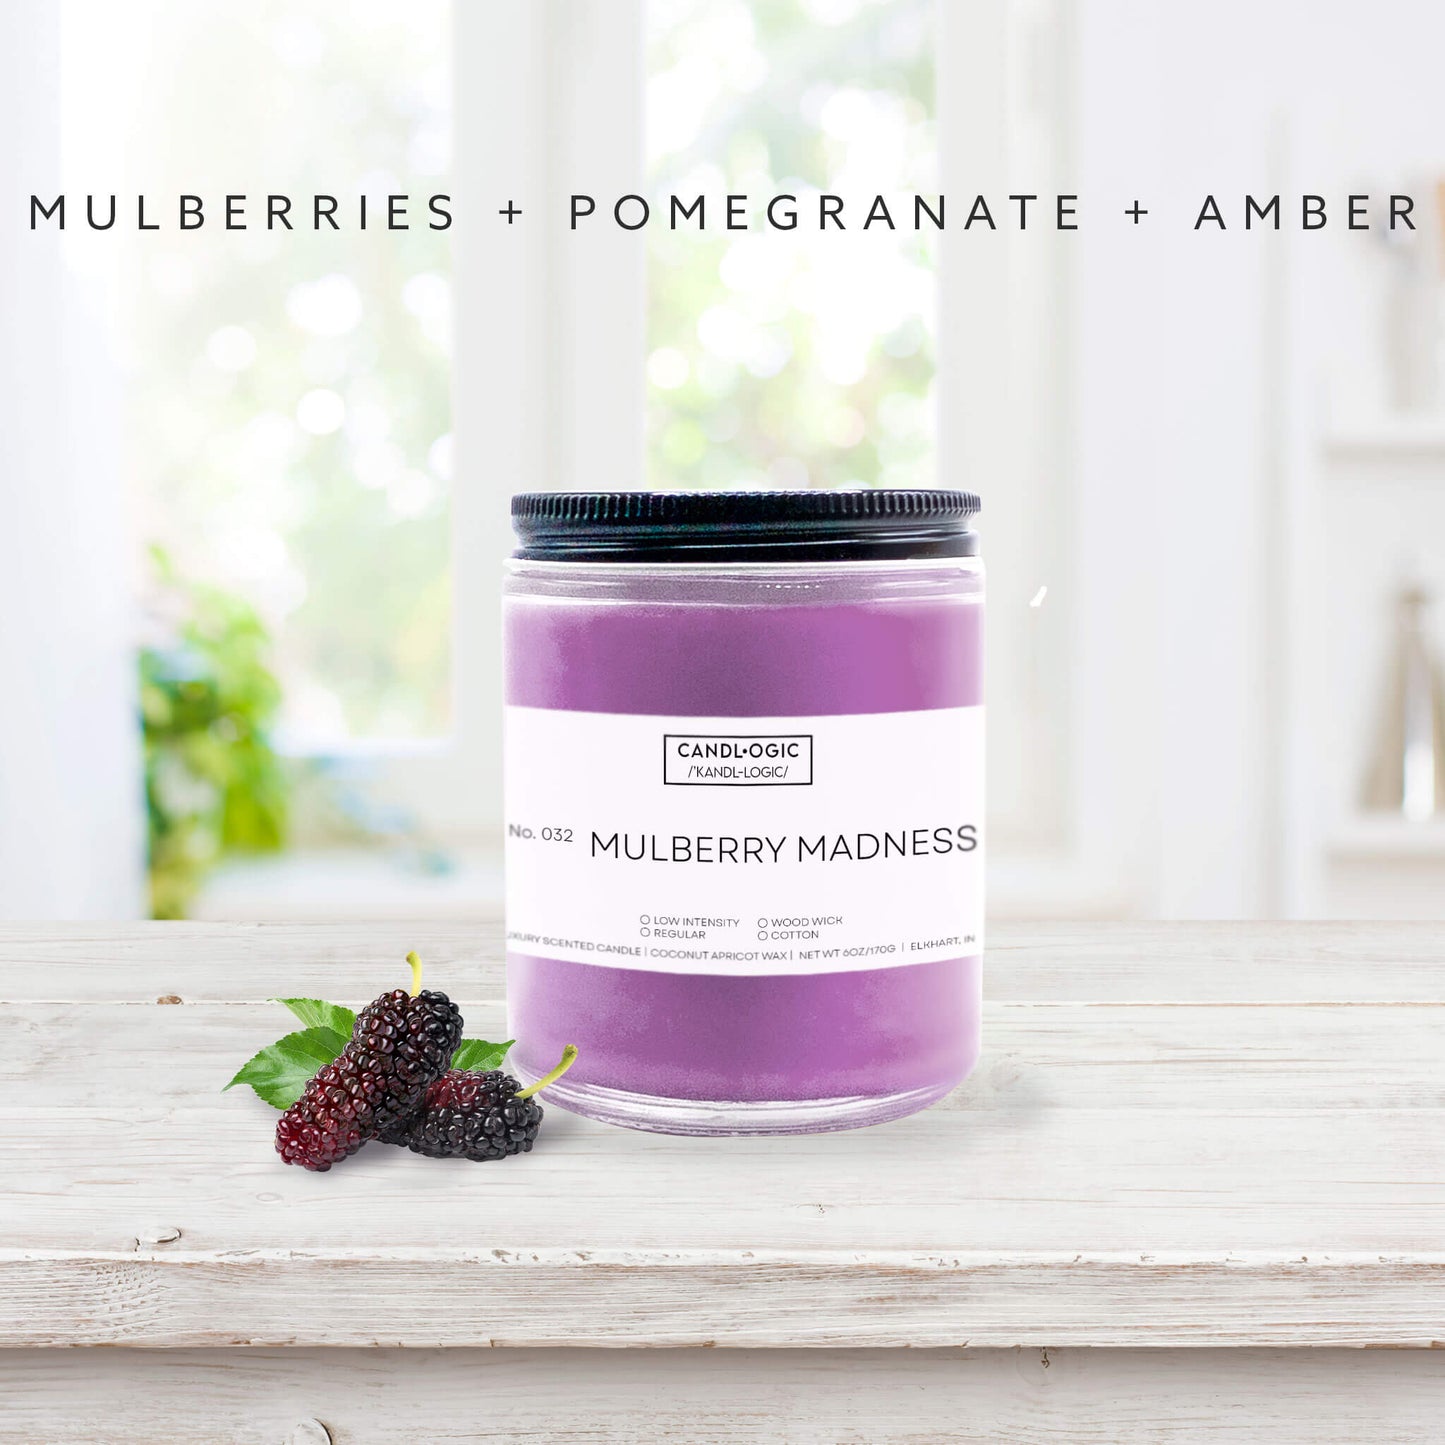 No. 032 Mulberry Madness candle - Mulberries, Pomegranate & Amber